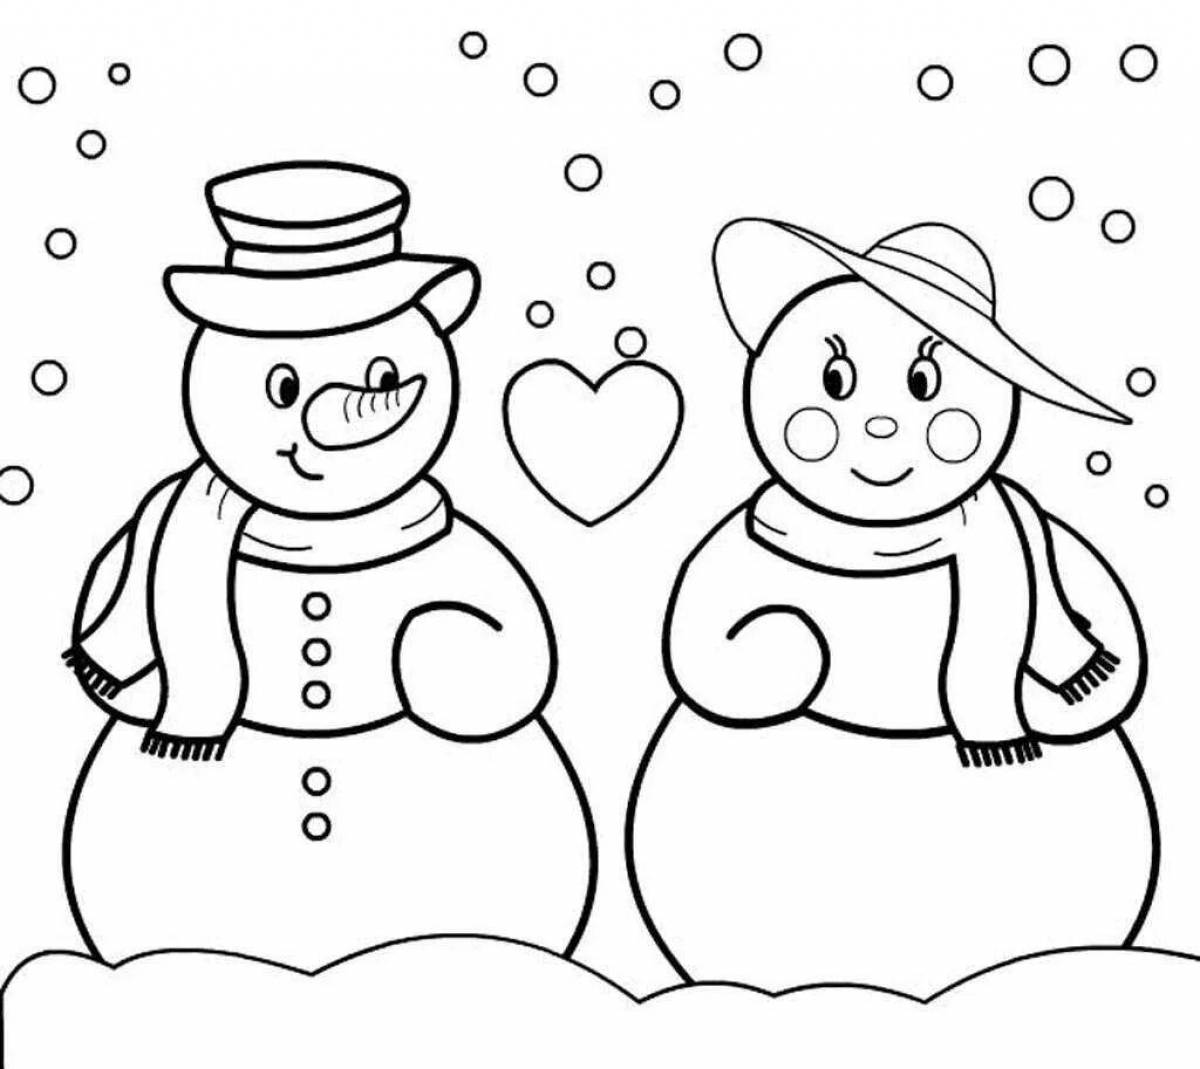 Sparkling snowman coloring book for kids 3 4